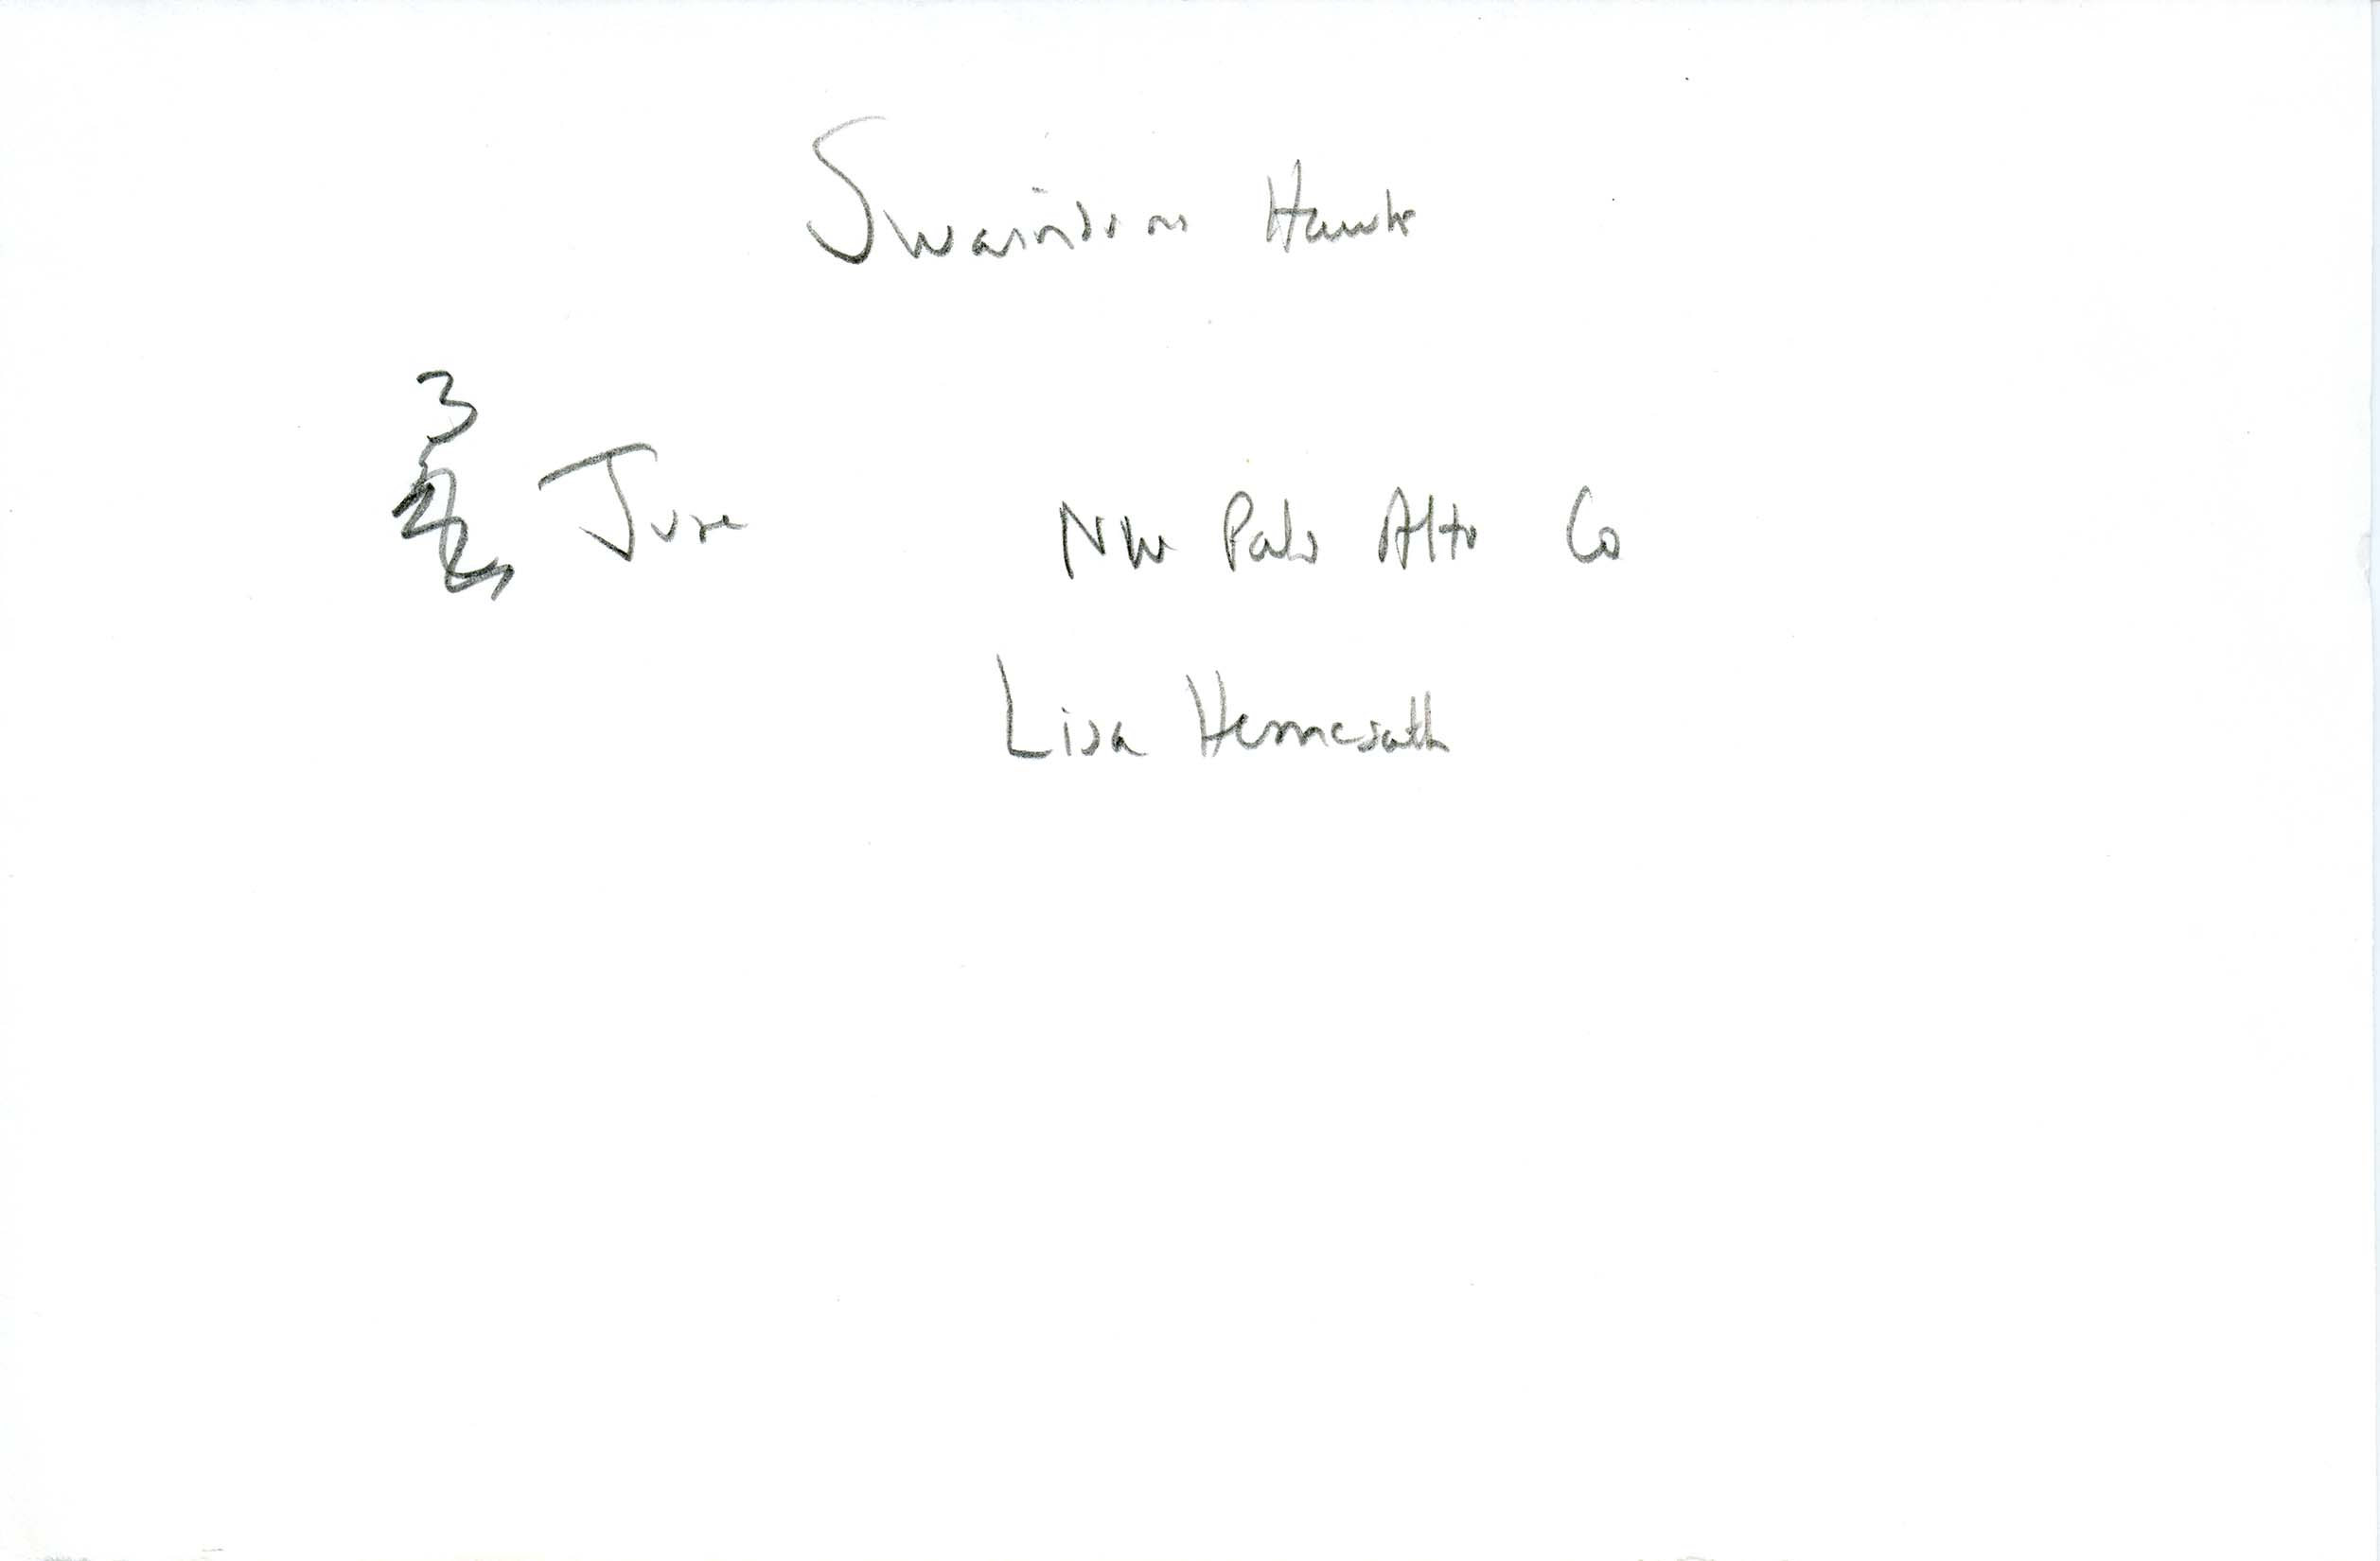 Field note about a Swainson's Hawk sighting contributed by Lisa Hemesath, June 3, 1989